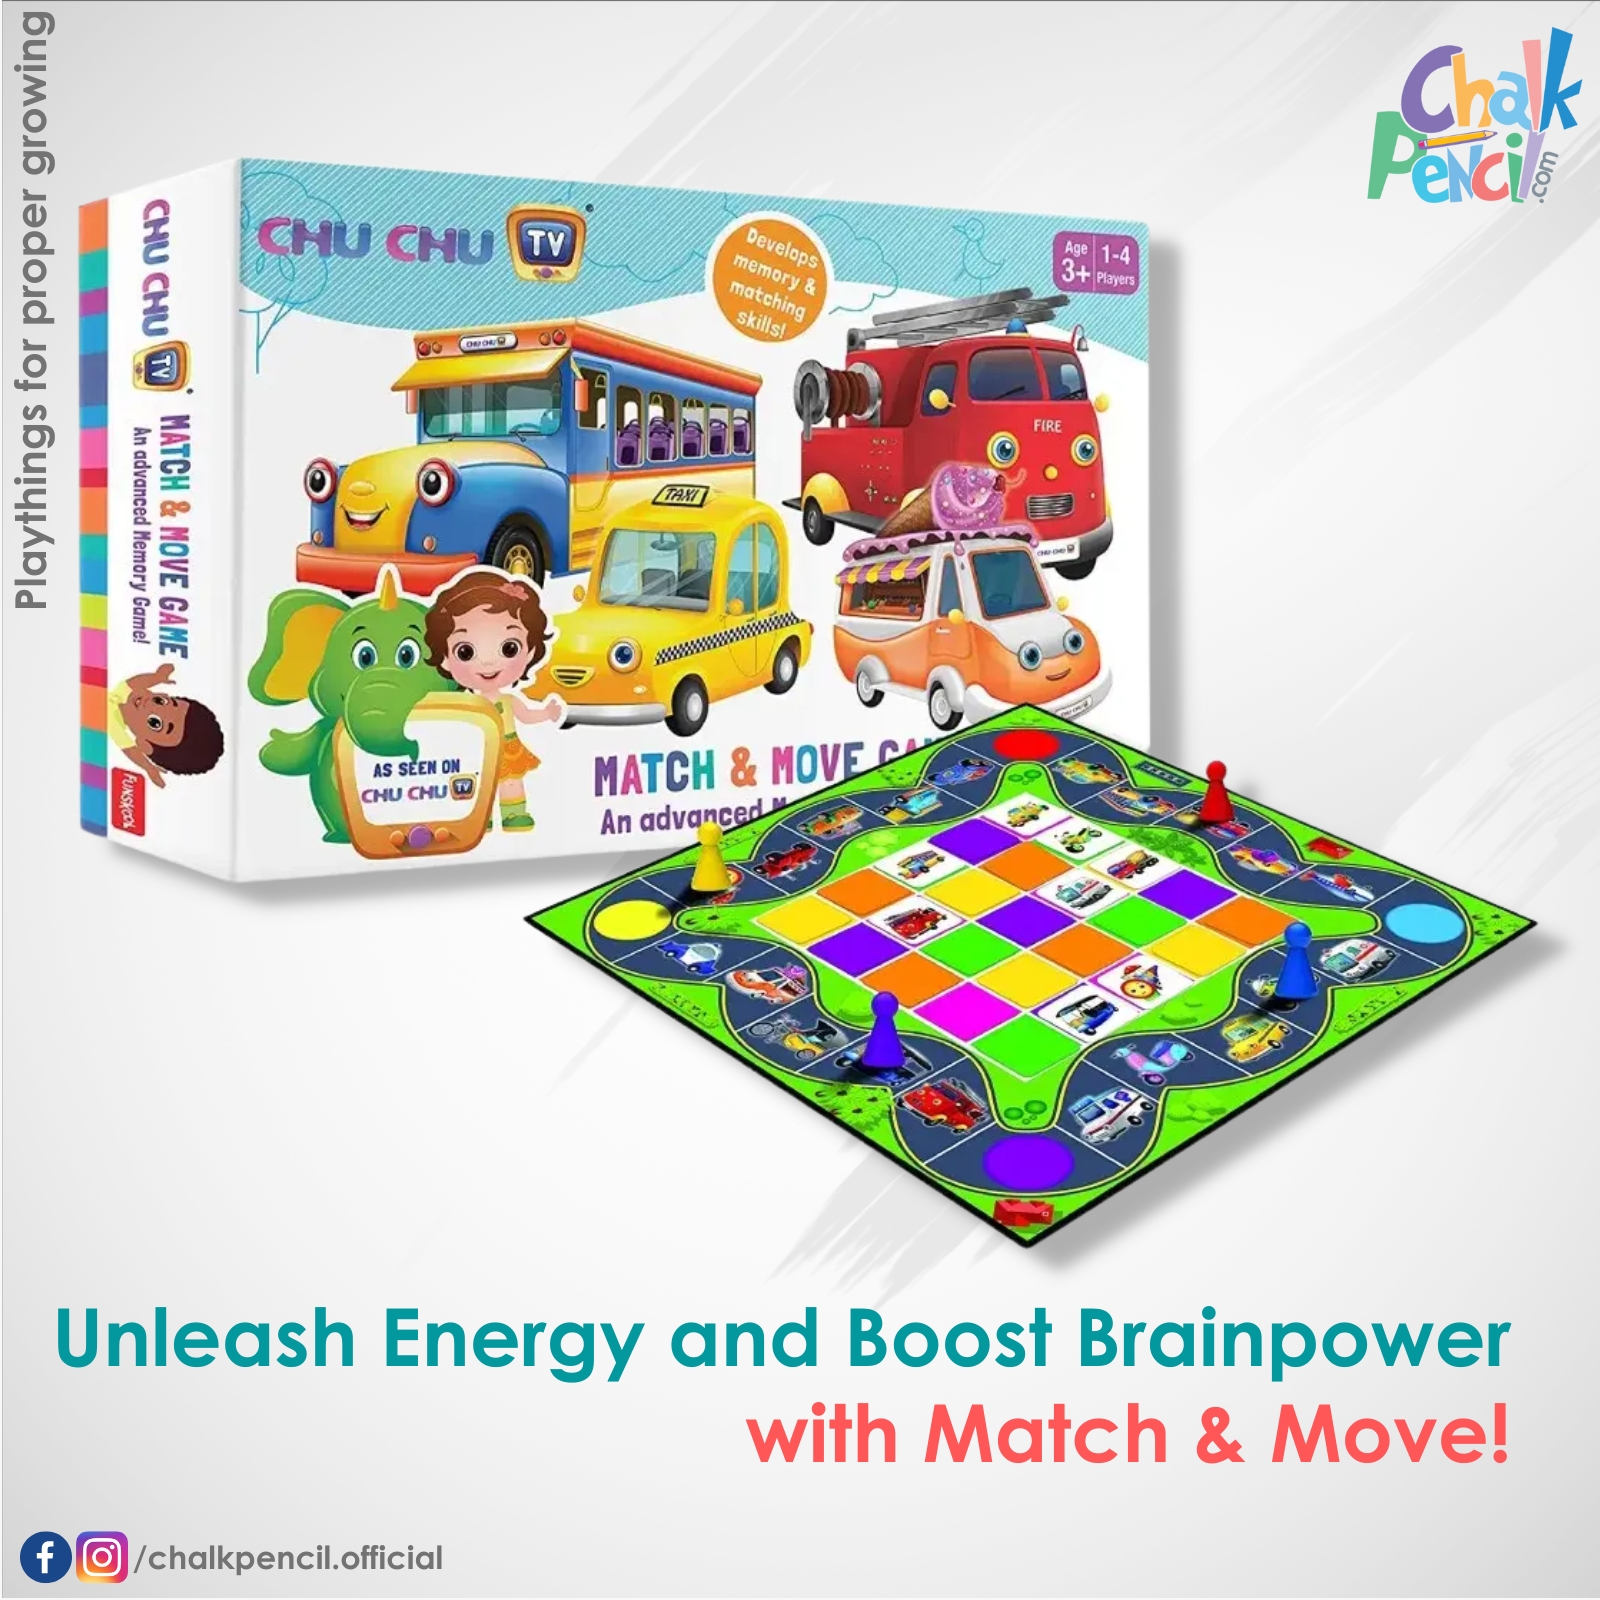 Match & Move Game